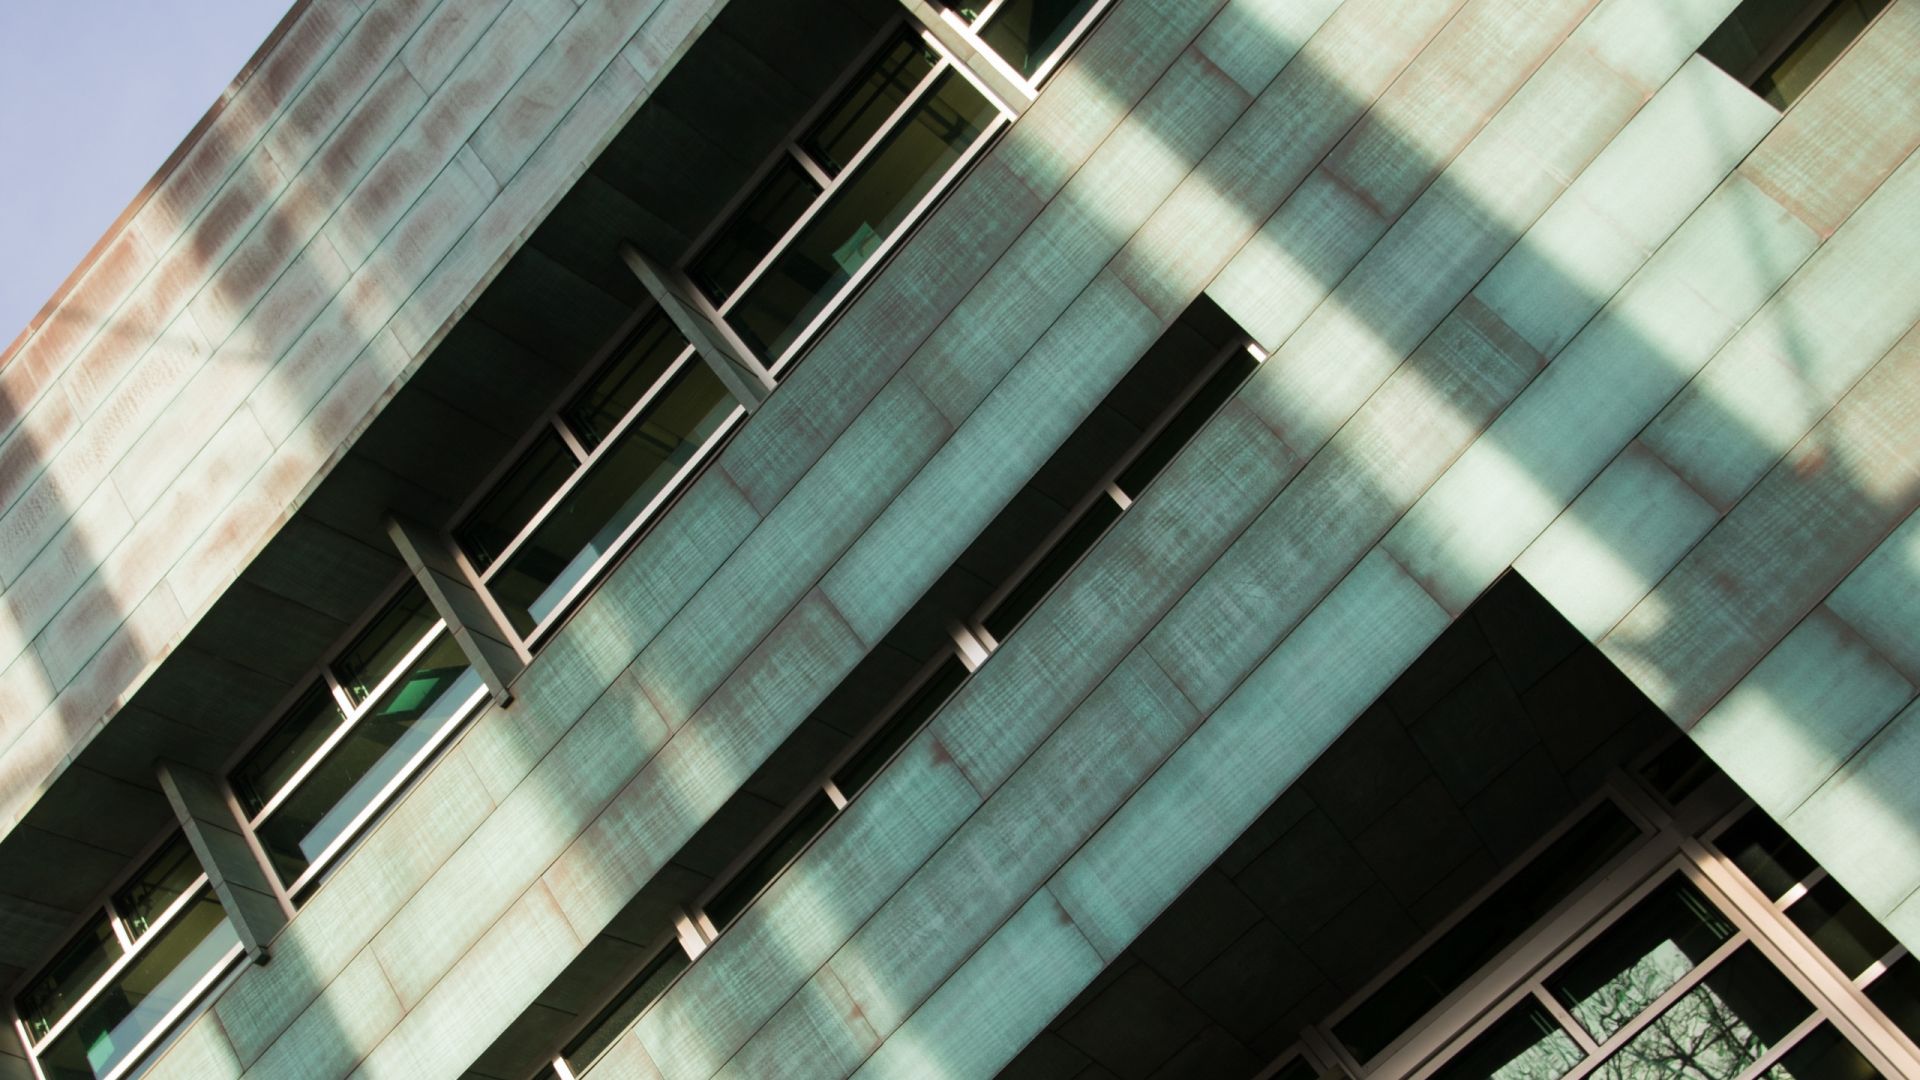 Angled close up shot of the greenish-brown patinated copper-clad exterior of the Stuckeman Family Building